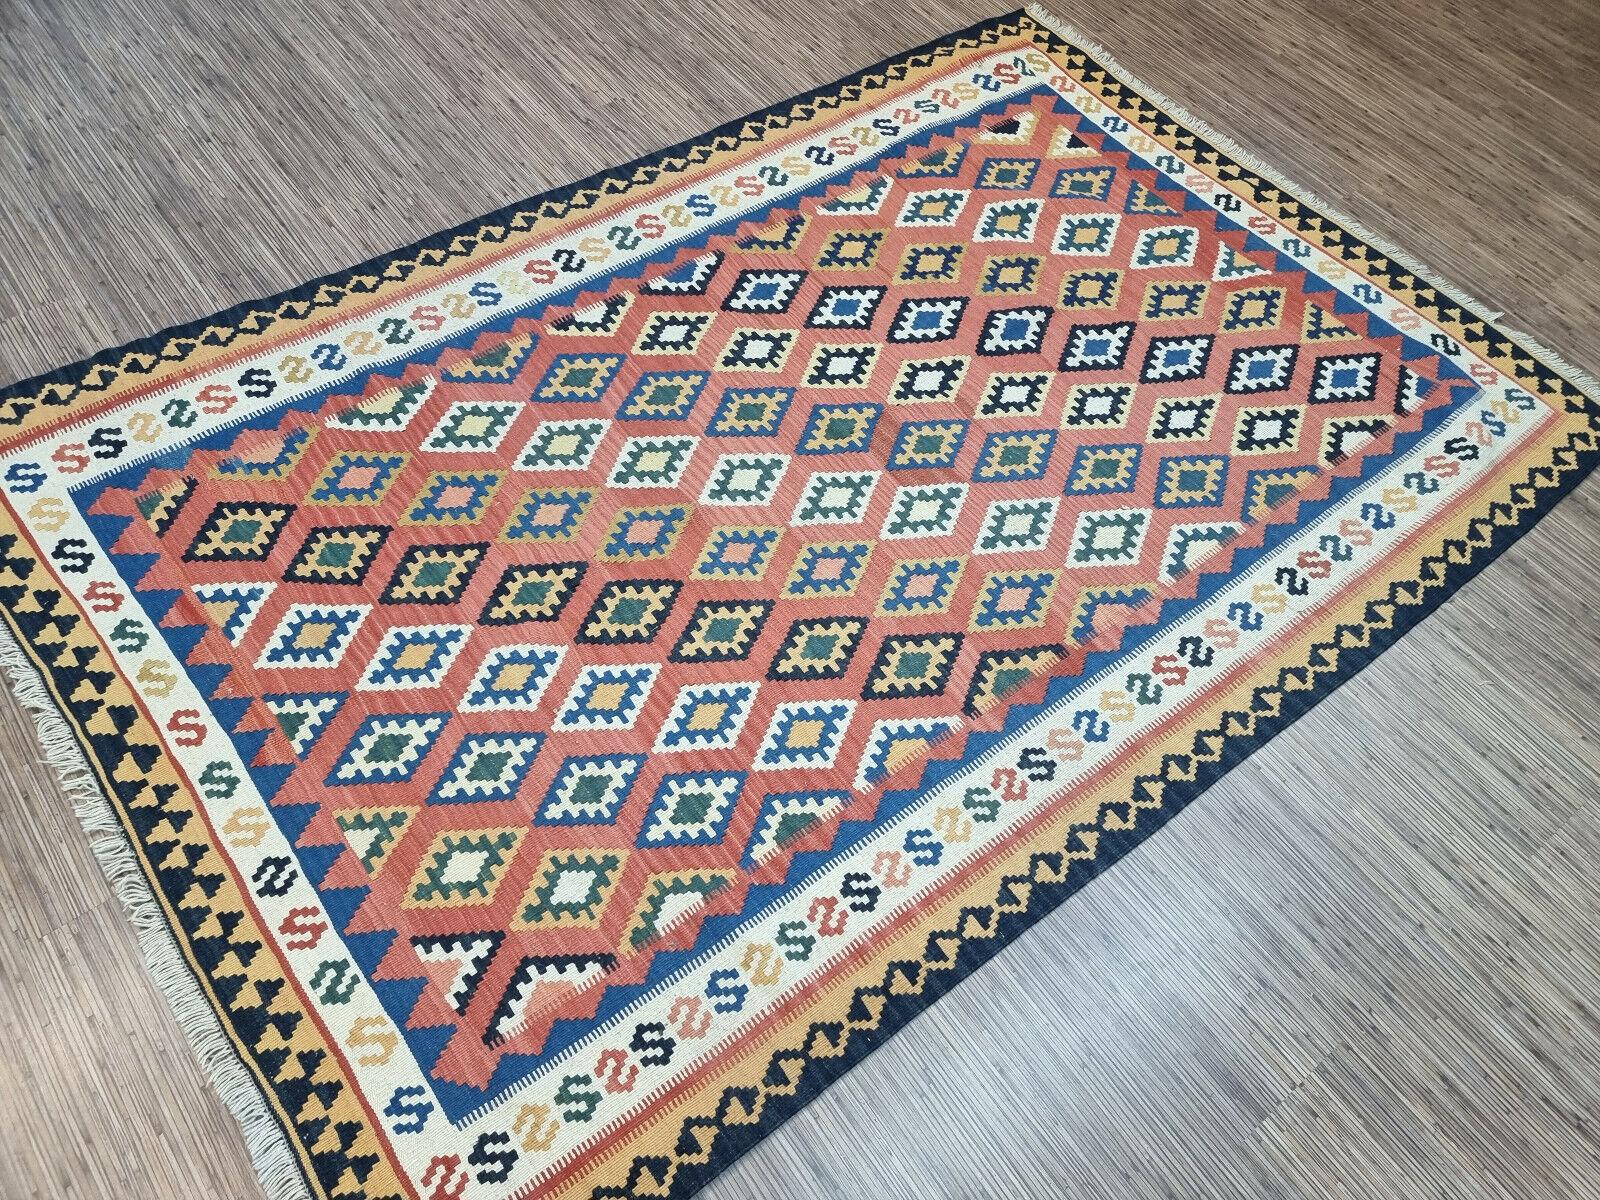 Handmade Vintage Persian Style Ardabil Kilim Rug 4.9' x 7.2', 1970s - 1D91 In Good Condition For Sale In Bordeaux, FR